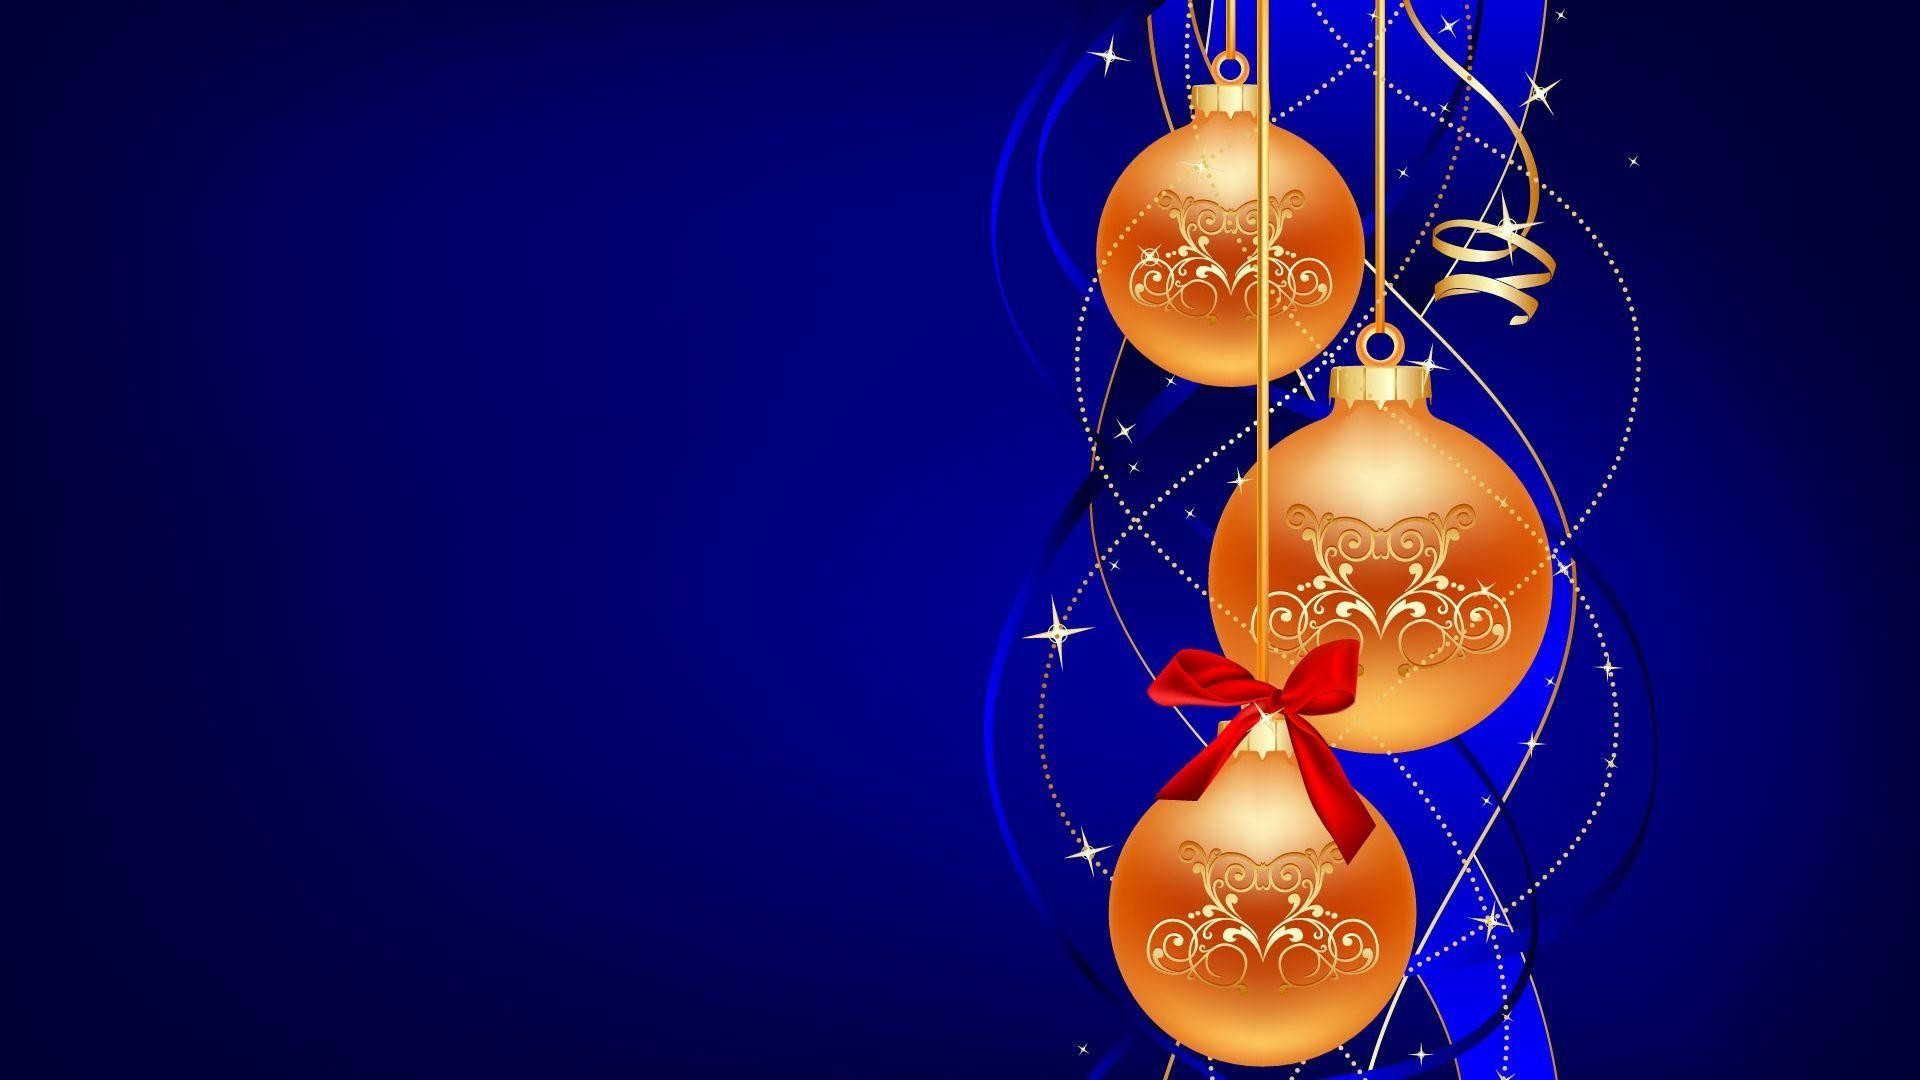 1920x1080 Xmas Stuff For > Blue Christmas Background Wallpaper